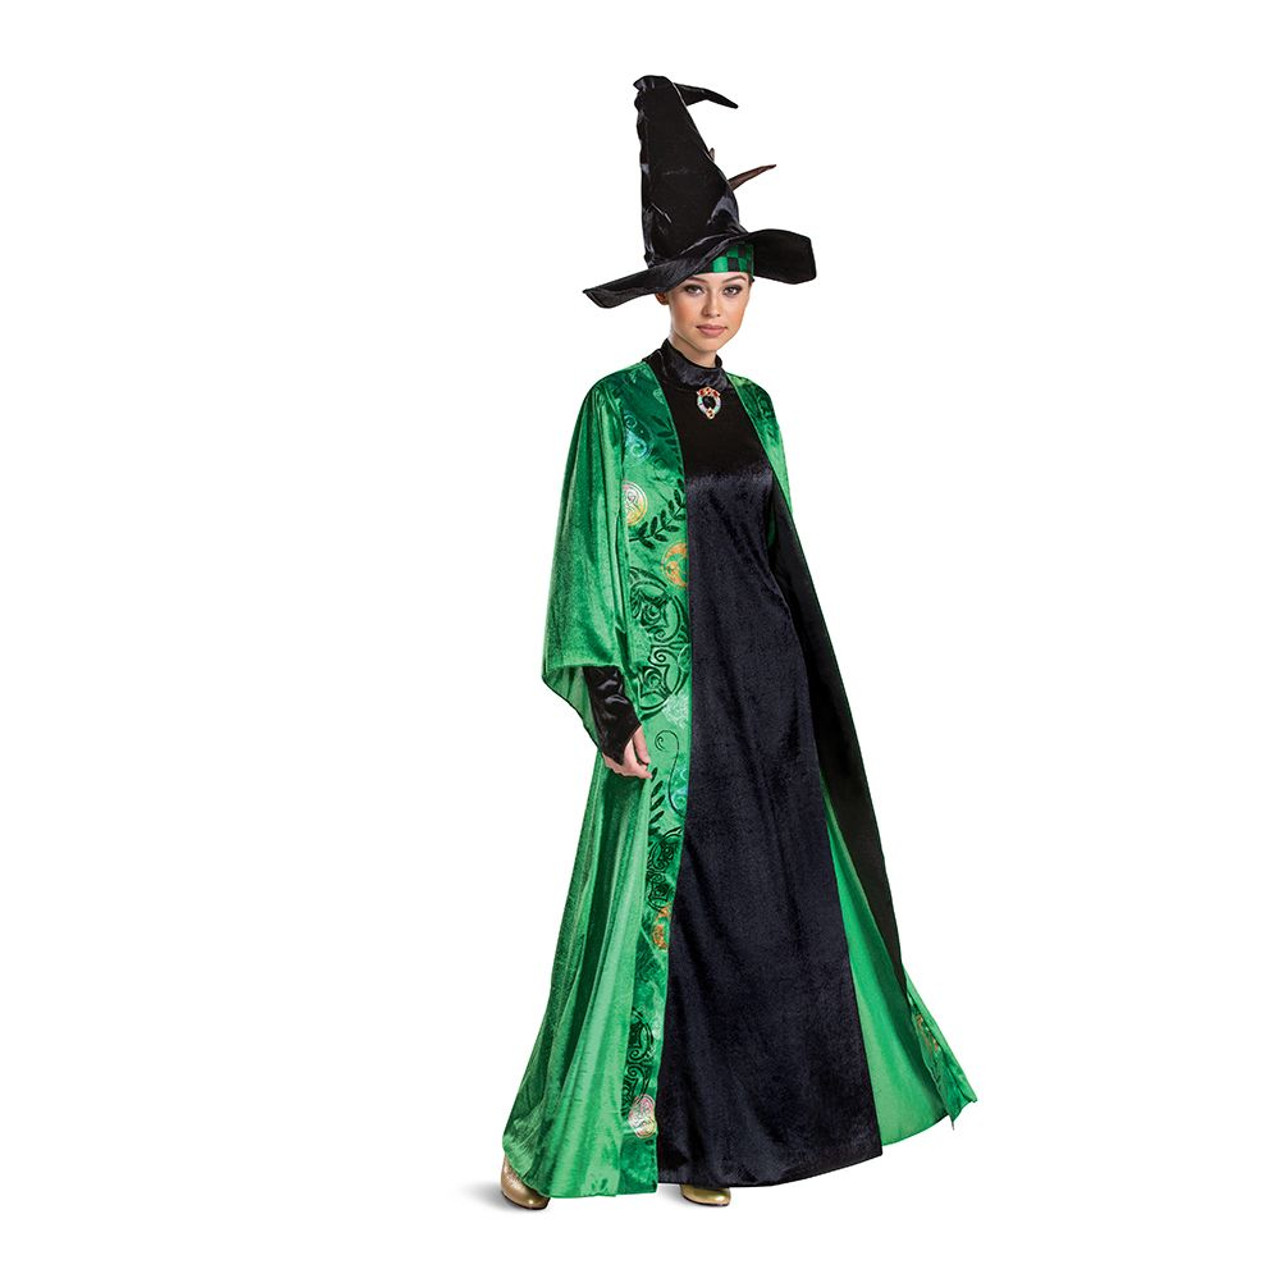 Harry Potter Deluxe Death Eater Costume for Adults